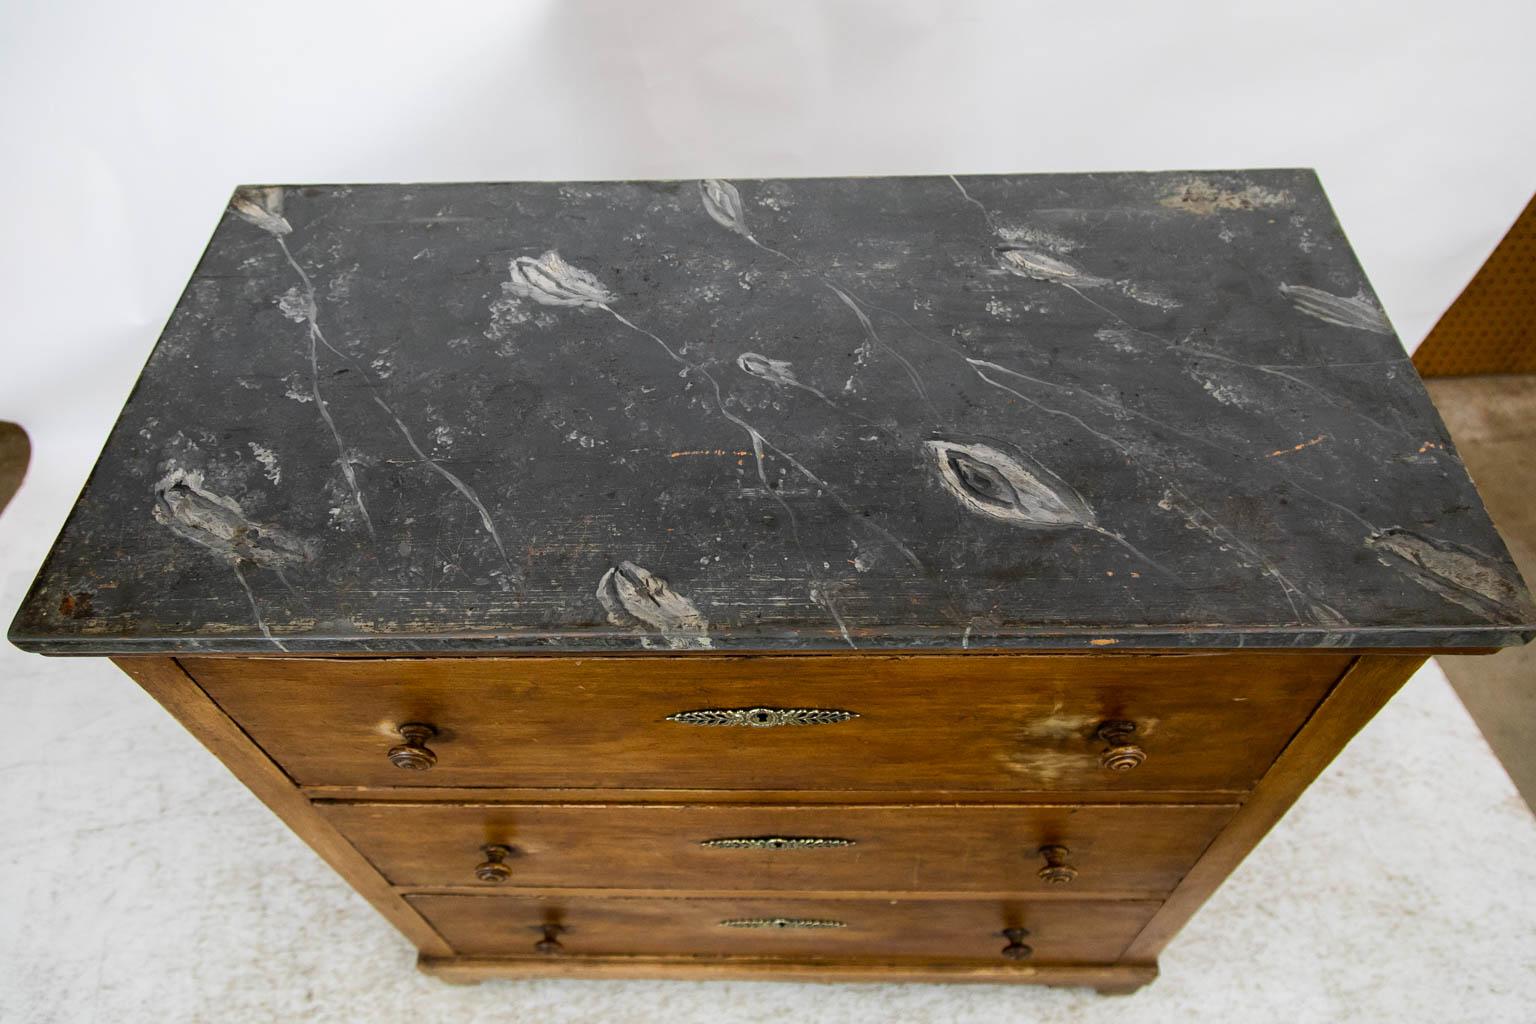 The top of this chest is faux painted to simulate gray and white marble. The drawer fronts are faux painted to simulate sycamore. The knobs and large steel locks are original. The escutcheons are later. The top drawer has some fading around the